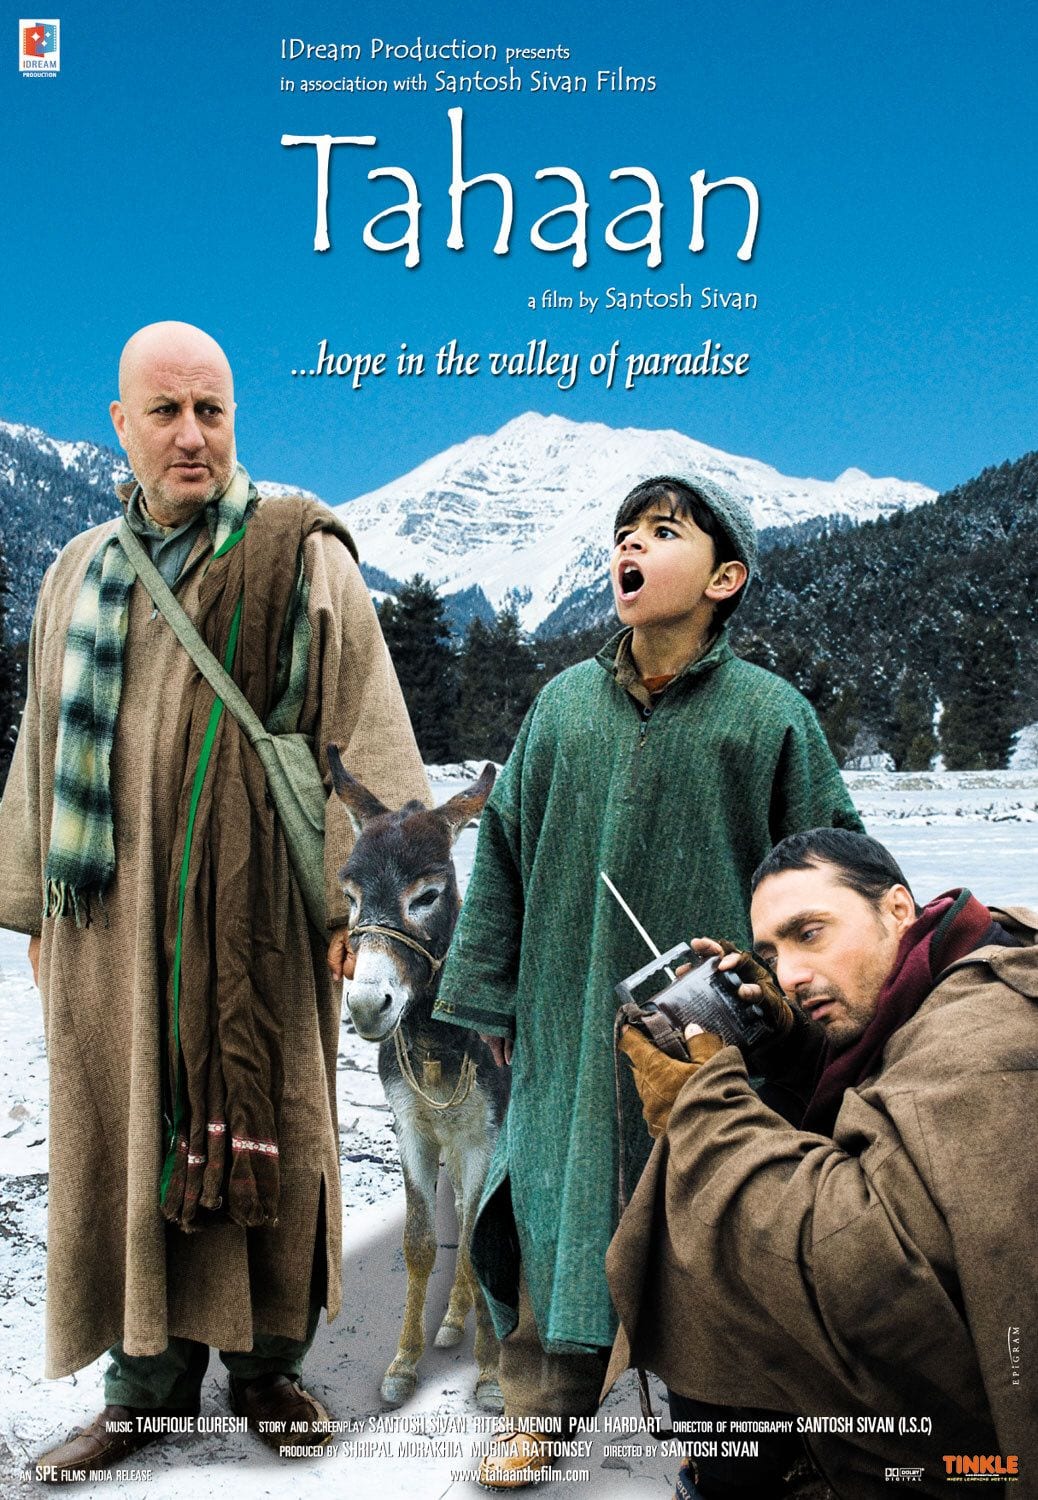 Poster for the movie "Tahaan"